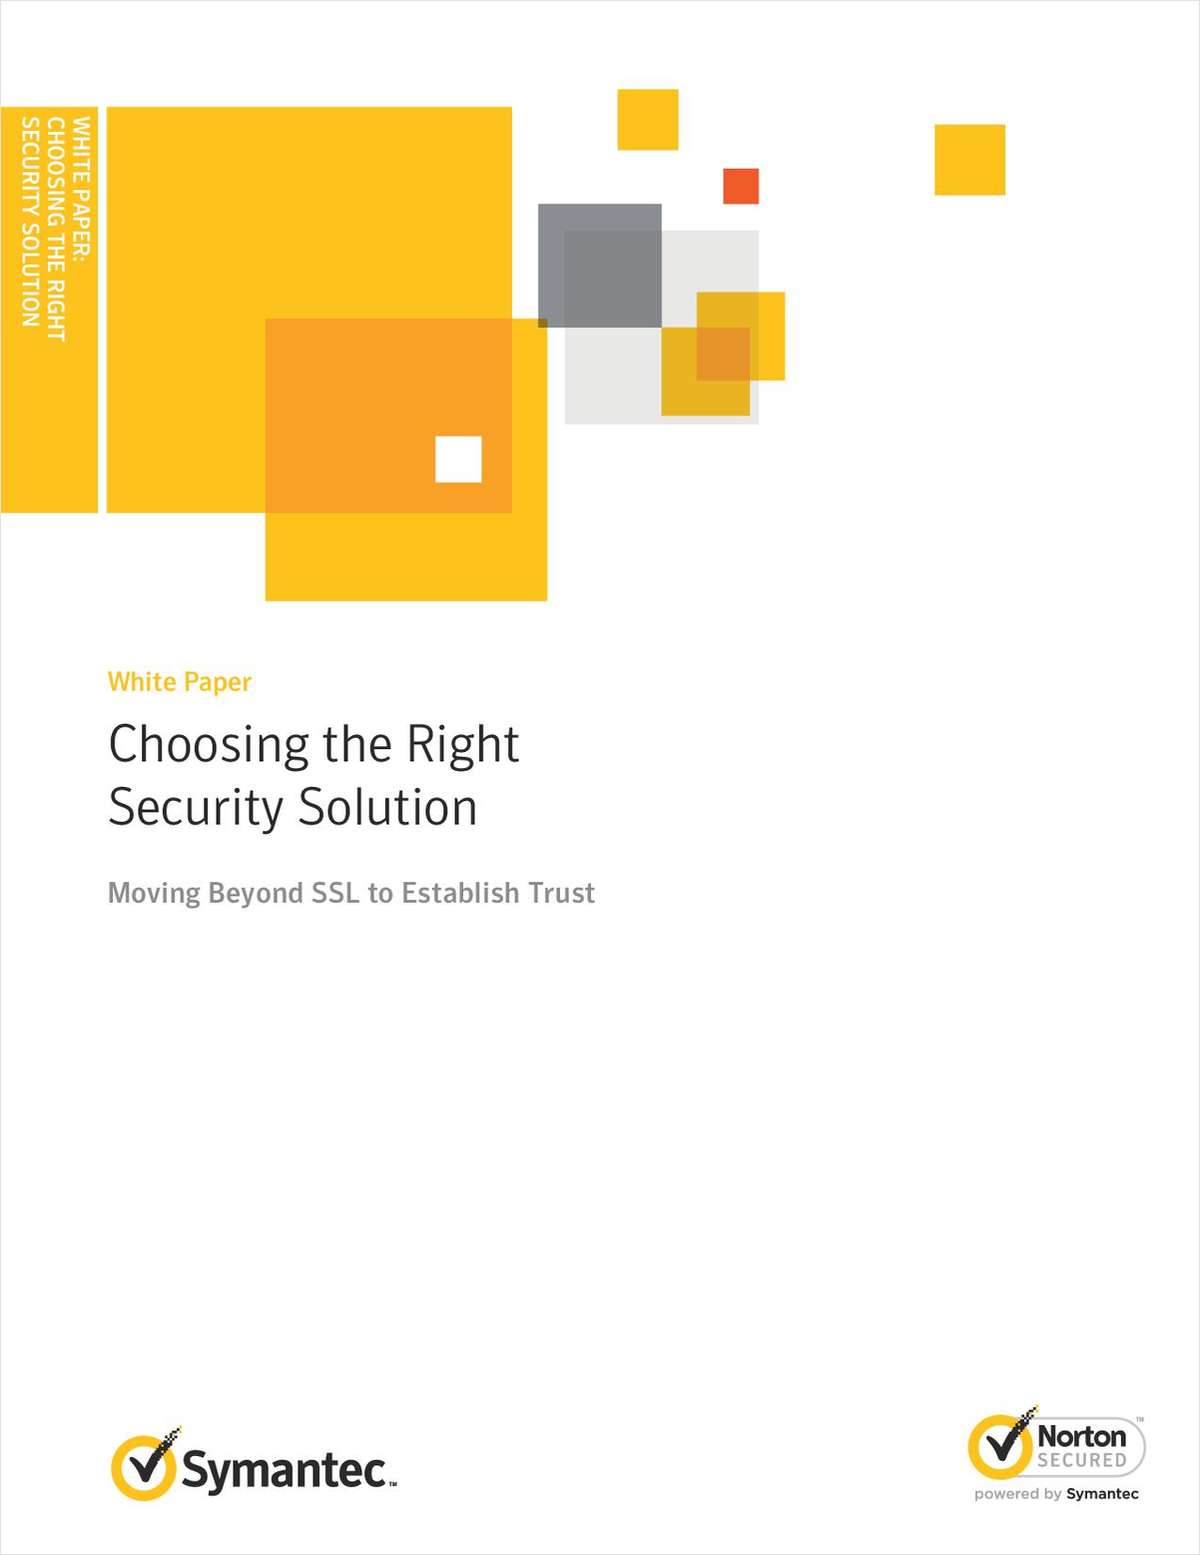 Choosing the Right Security Solution: Moving Beyond SSL to Establish Trust